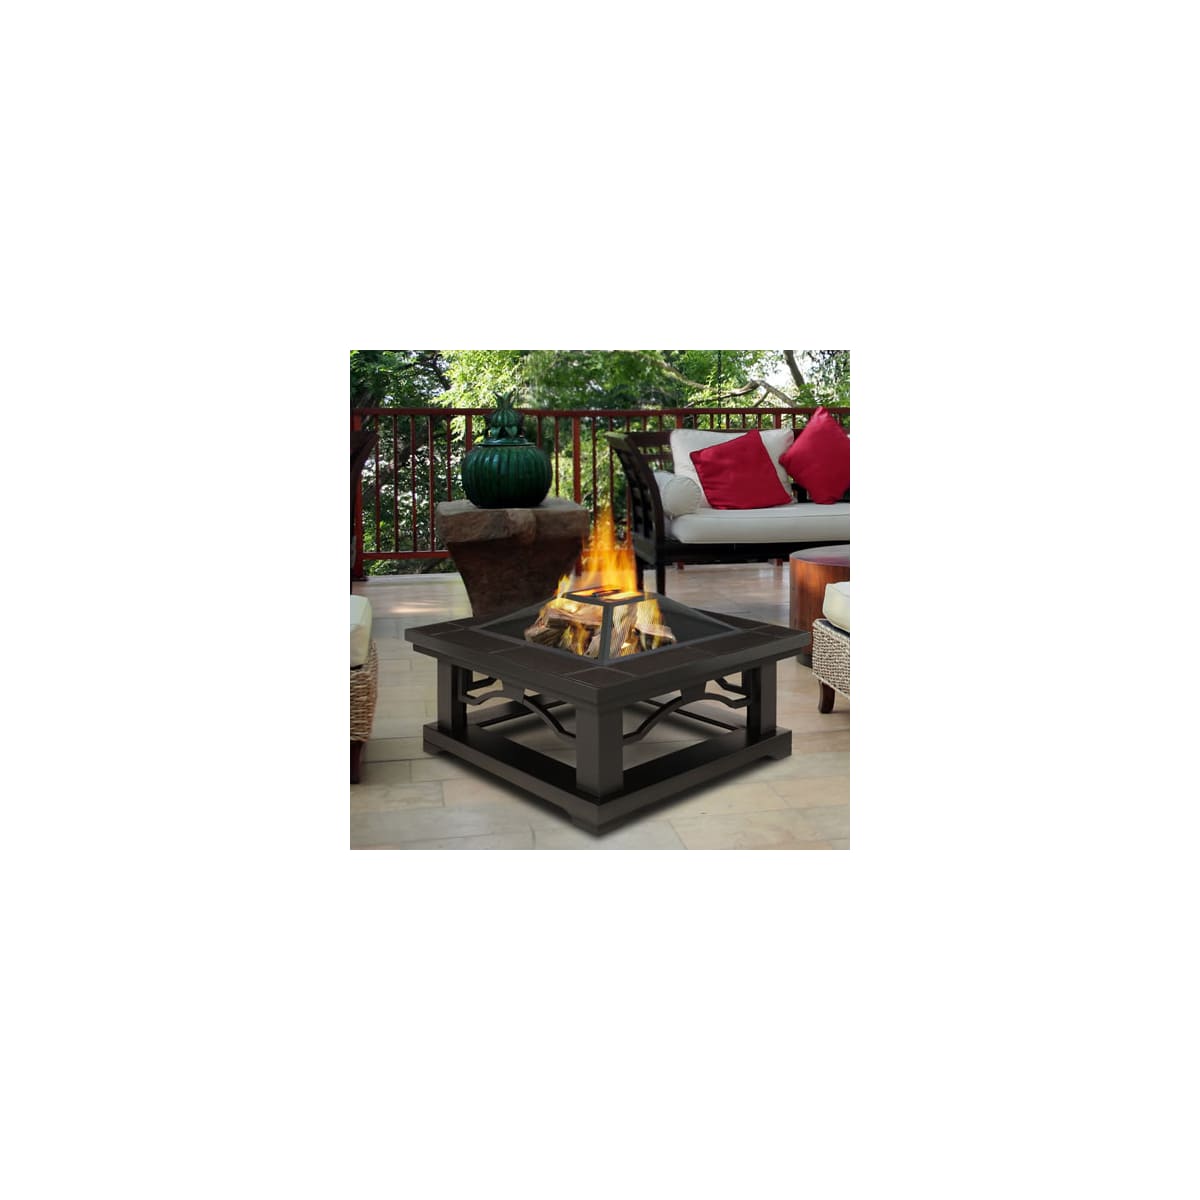 Real Flame Crestone Fire Pit 914 Brt, Real Flame Crestone Fire Pit